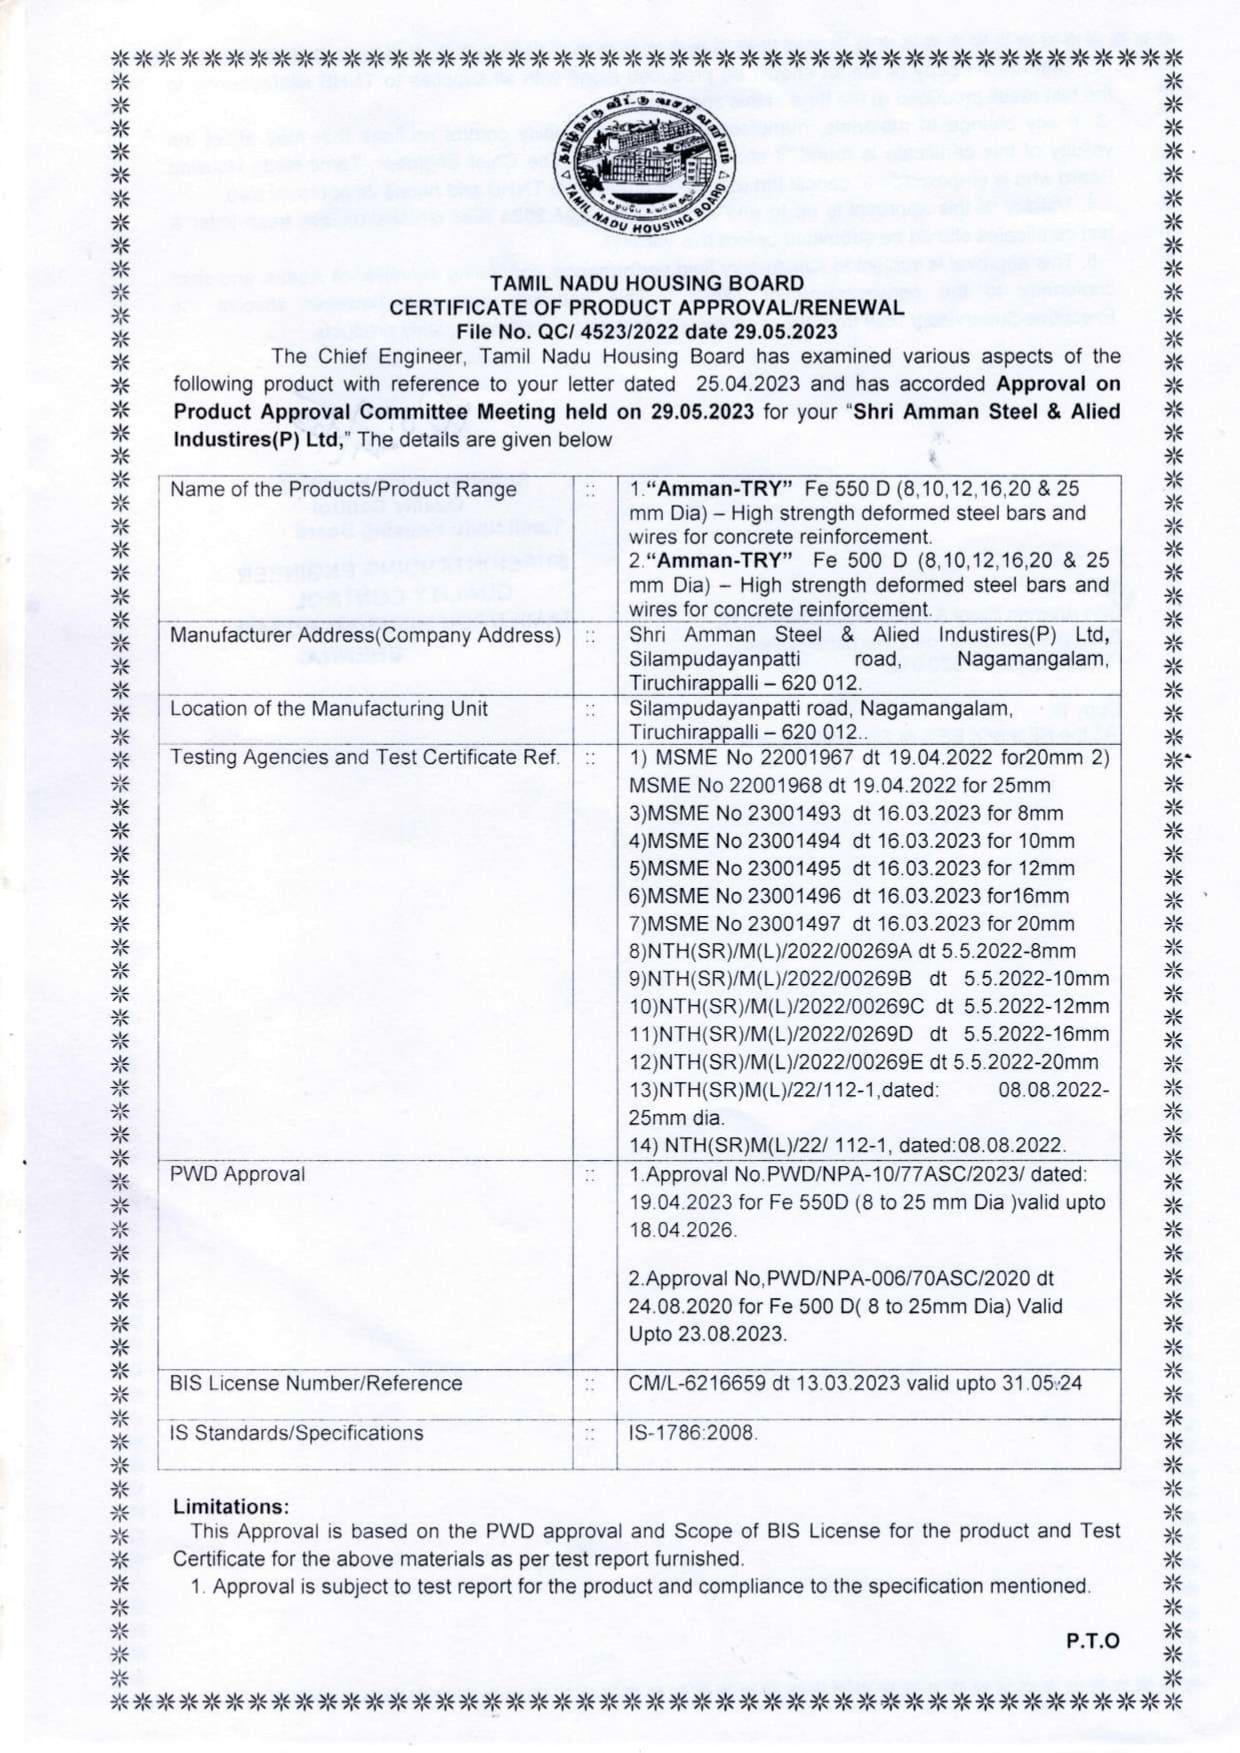 TNHB Product Approval Certificate